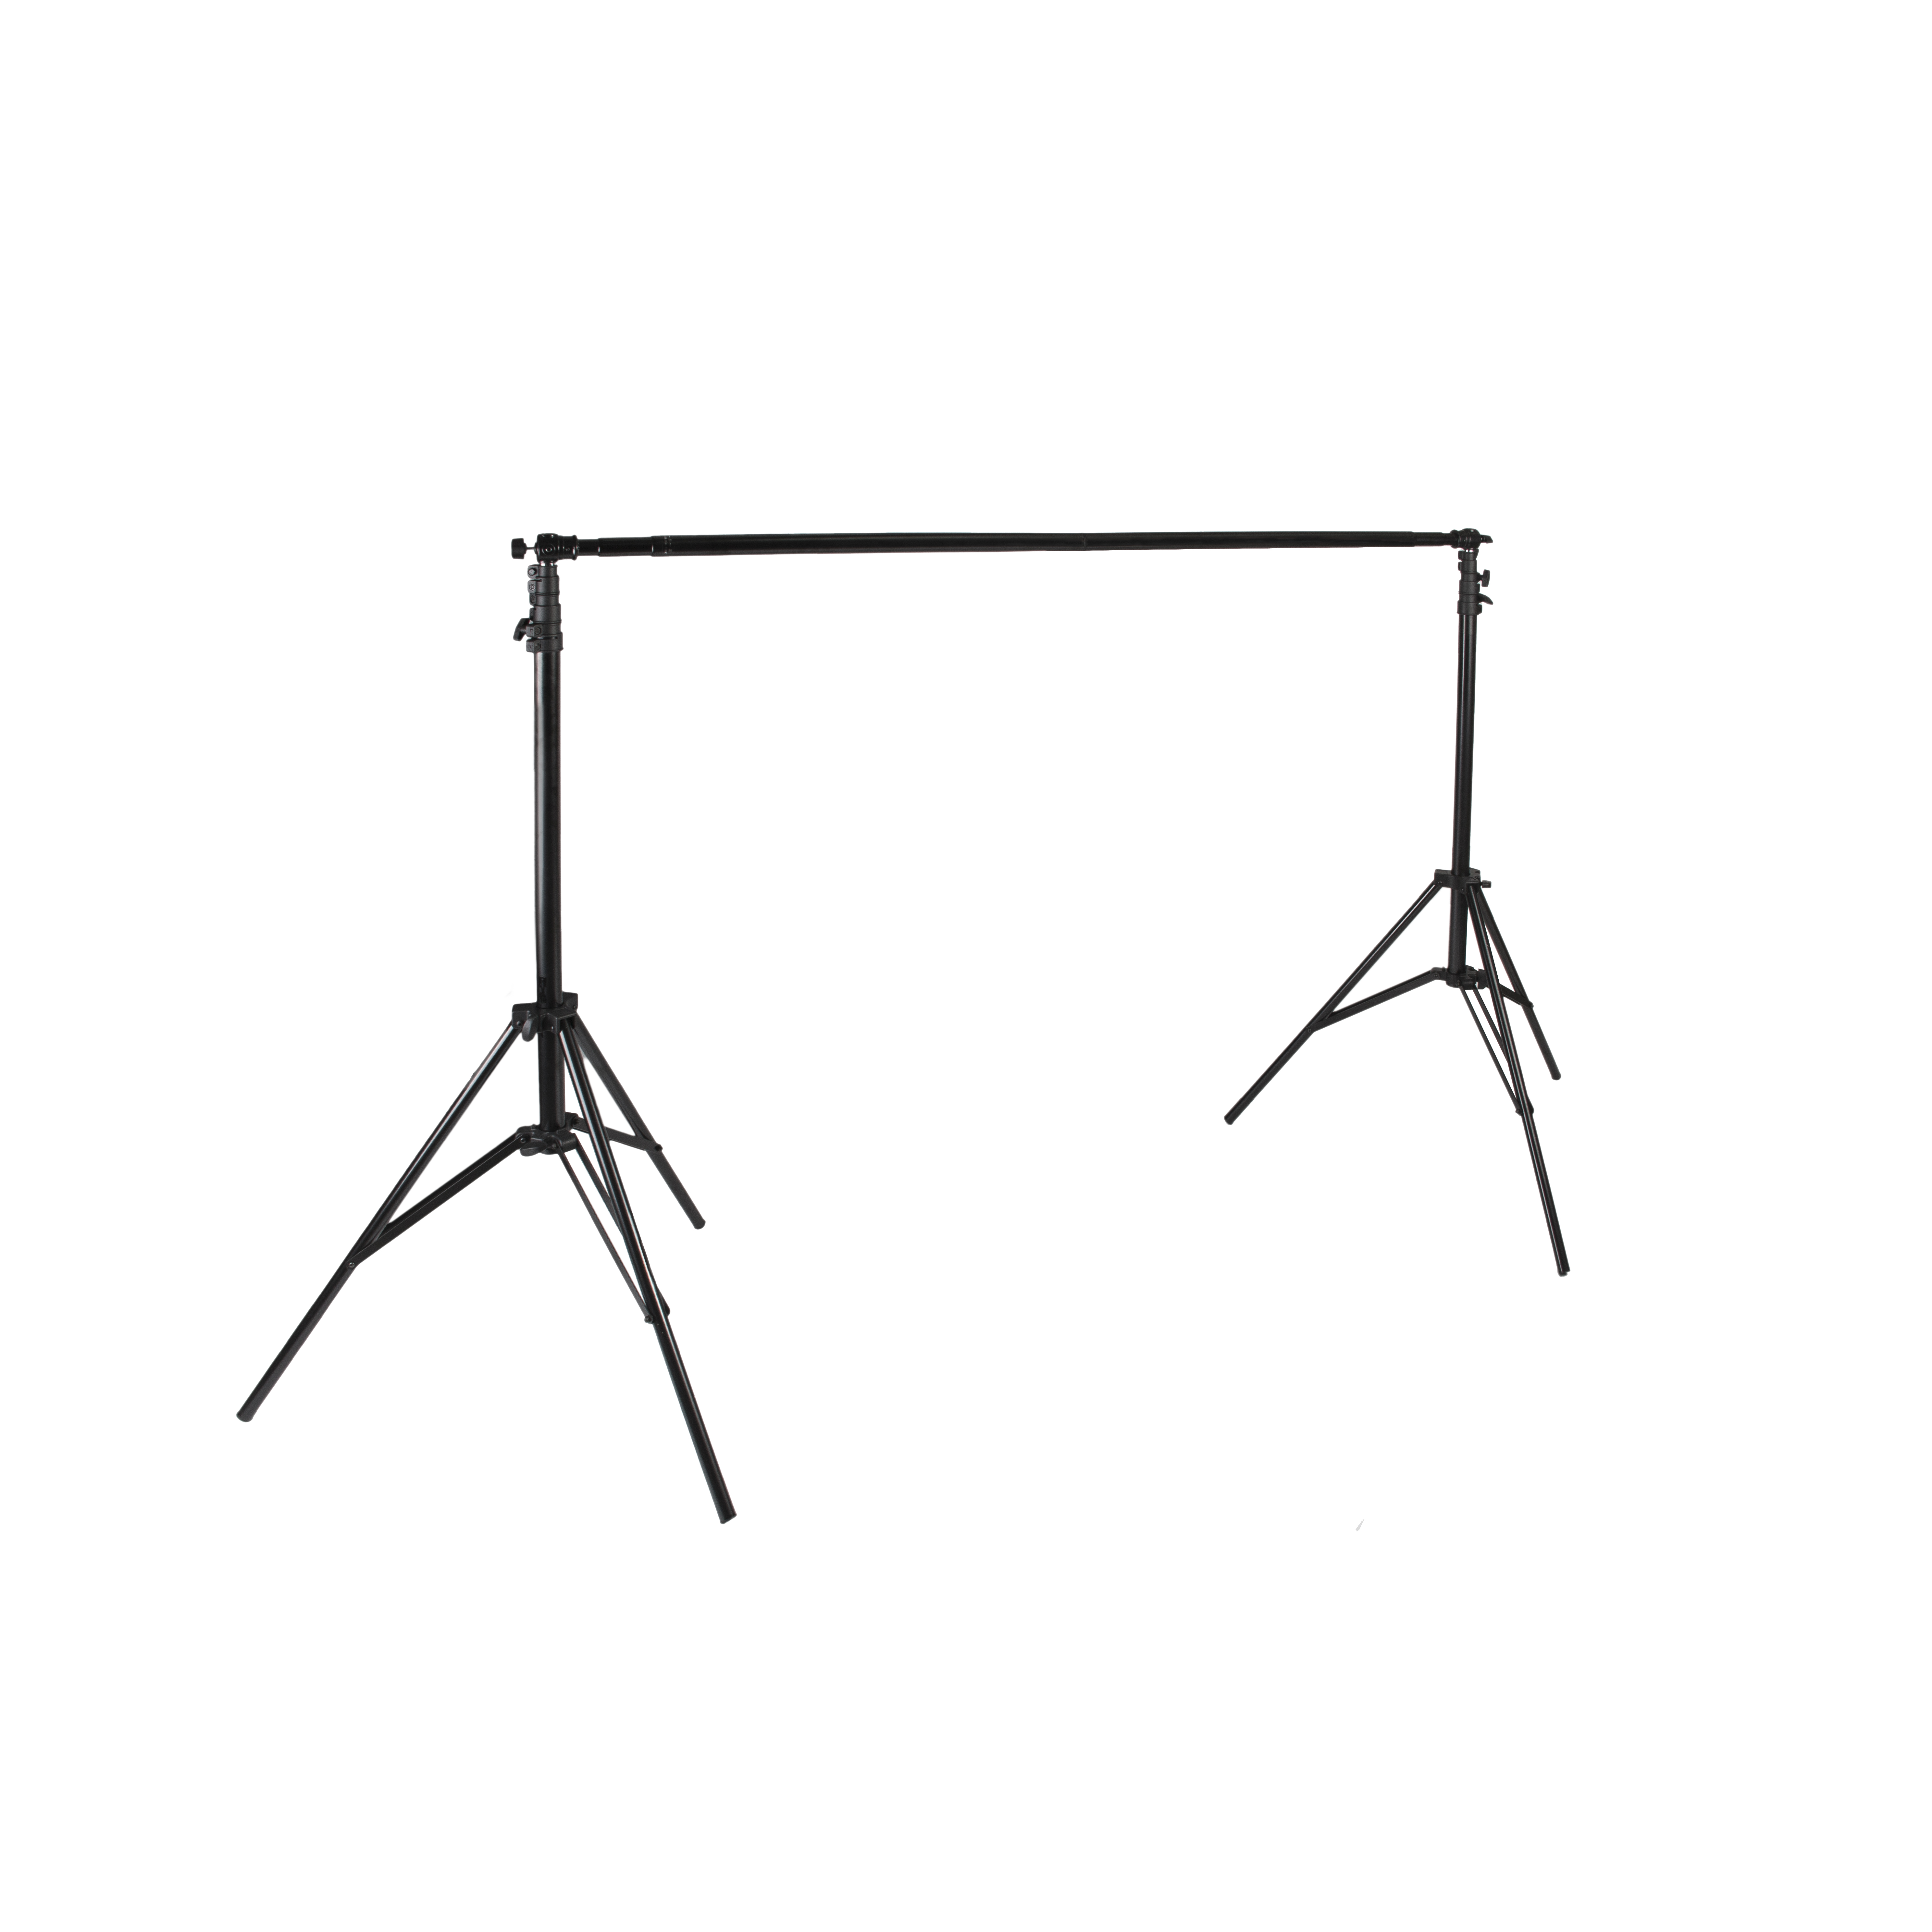 Promaster 9811 Telescoping Background Stand System